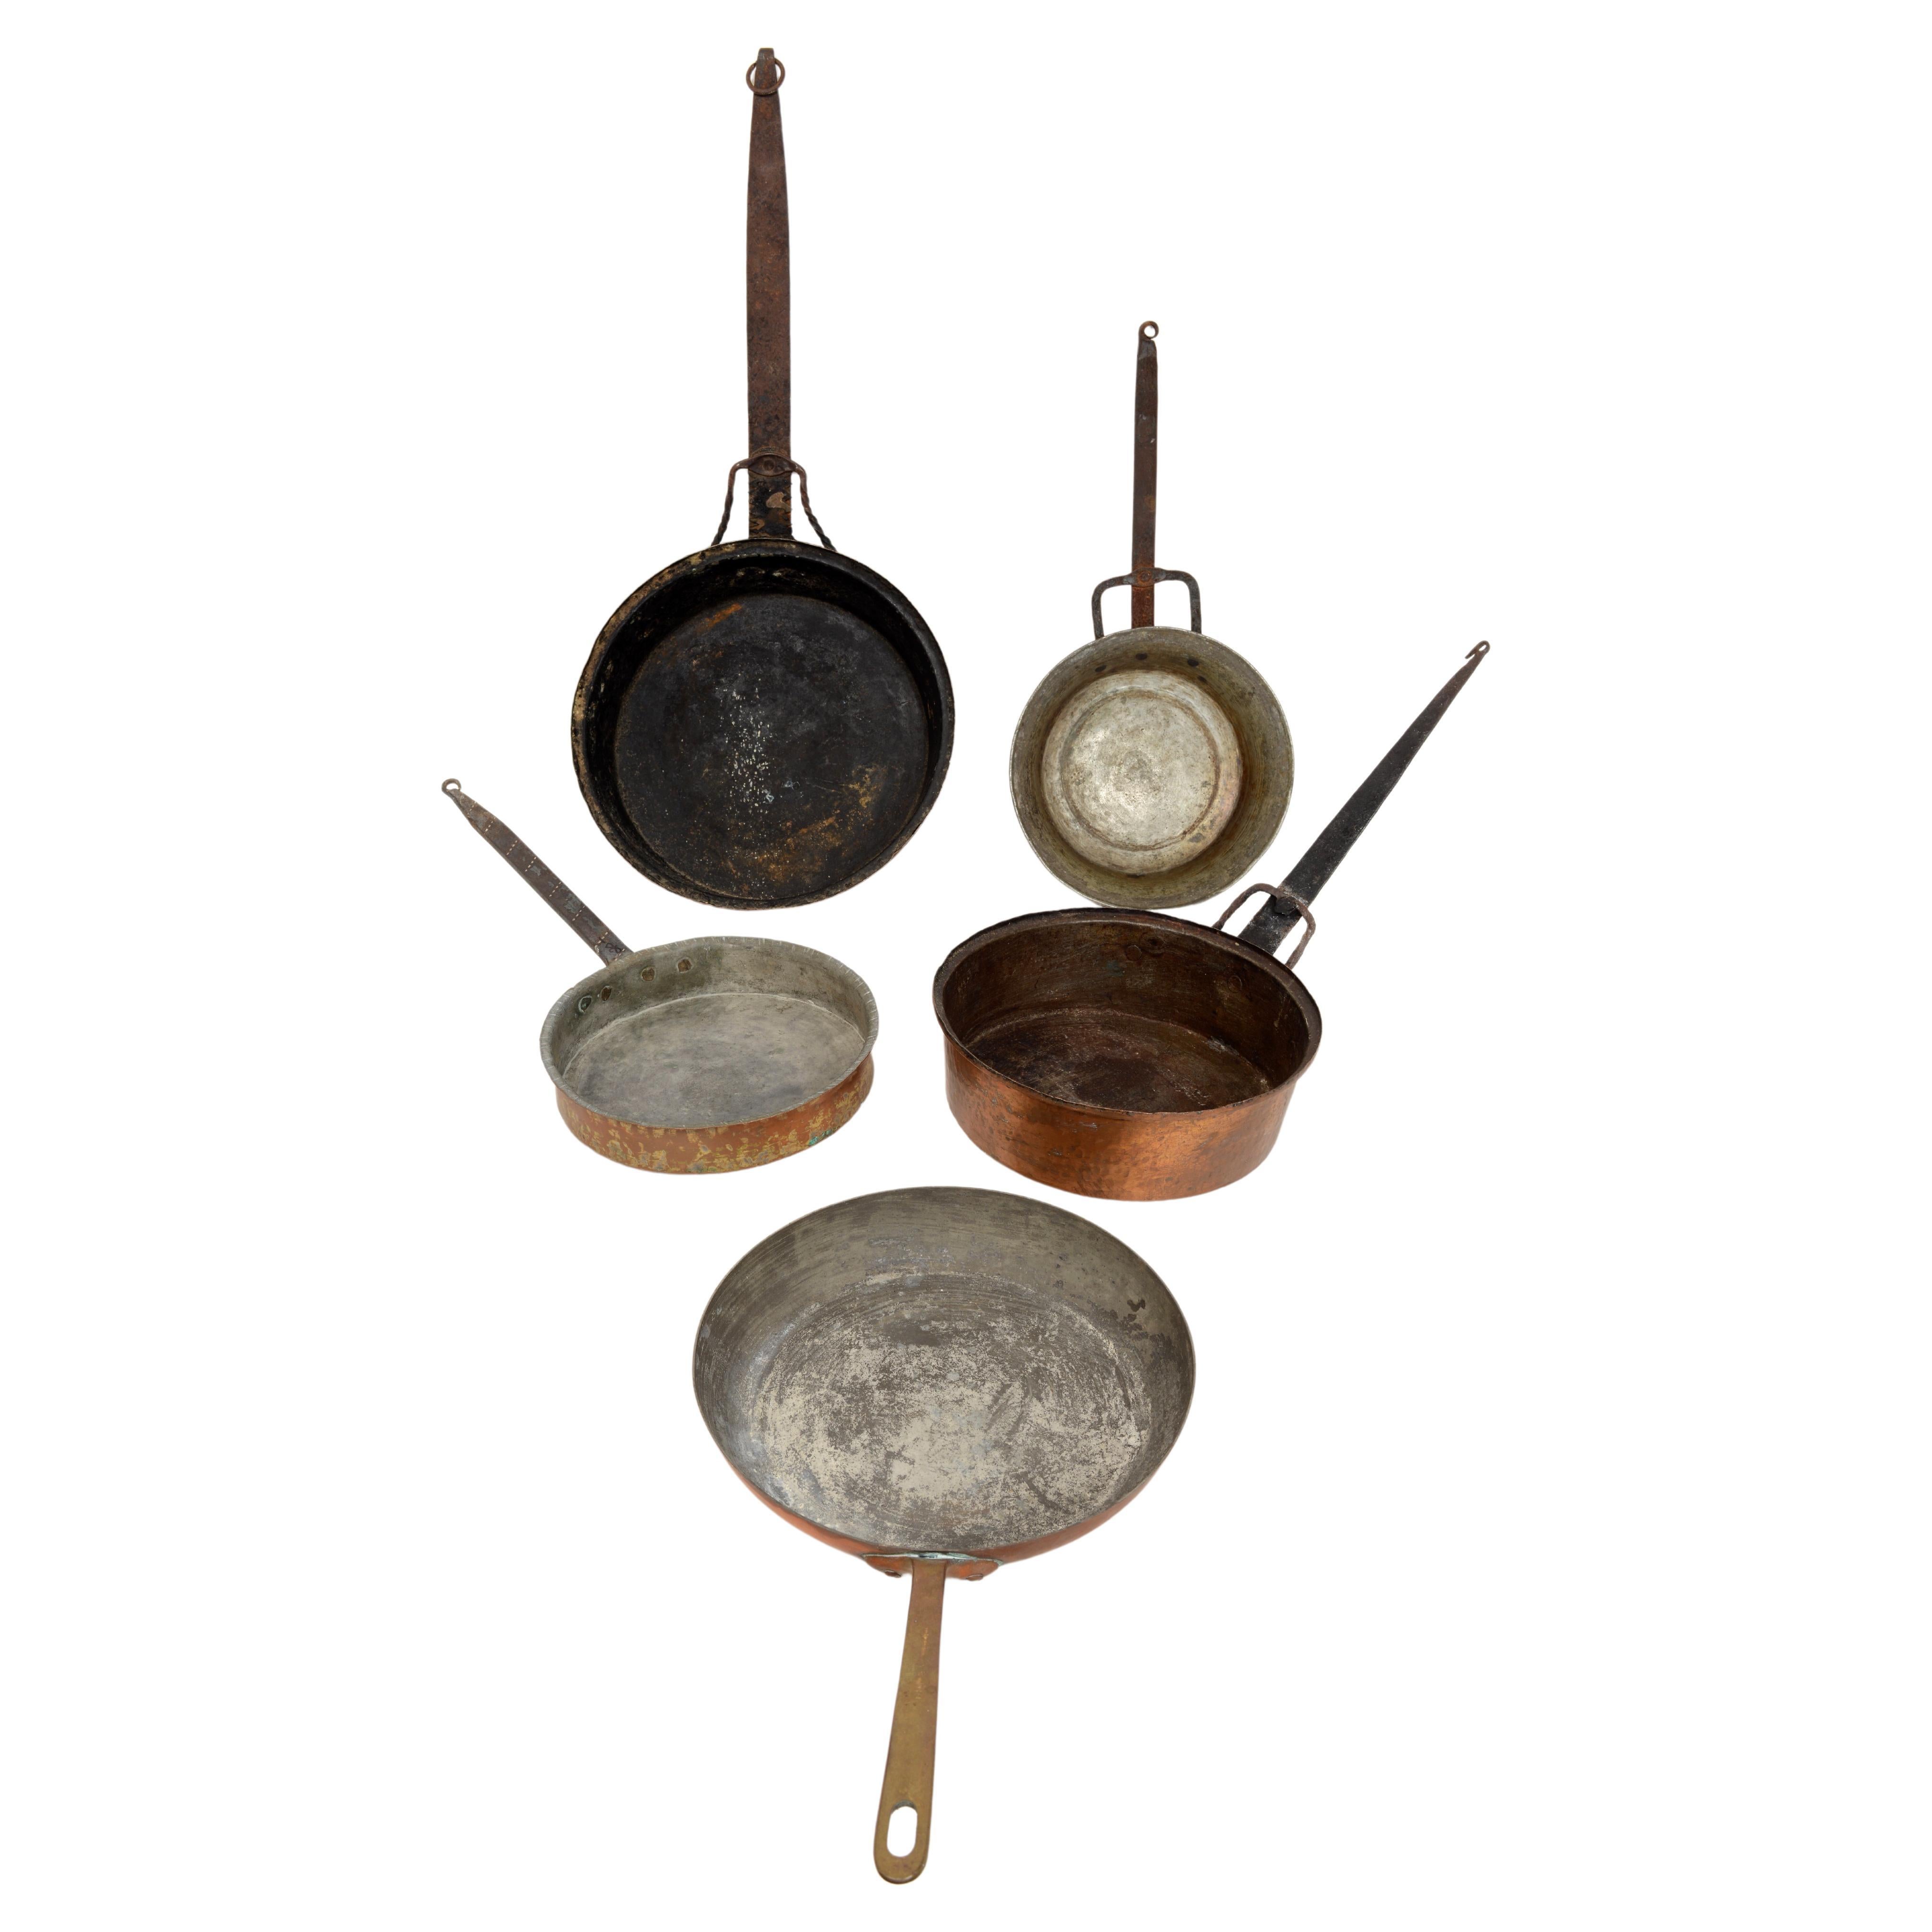 Set of 5 Early Copper Pans, in Original Condition, Great Patina, 18th / 19th C